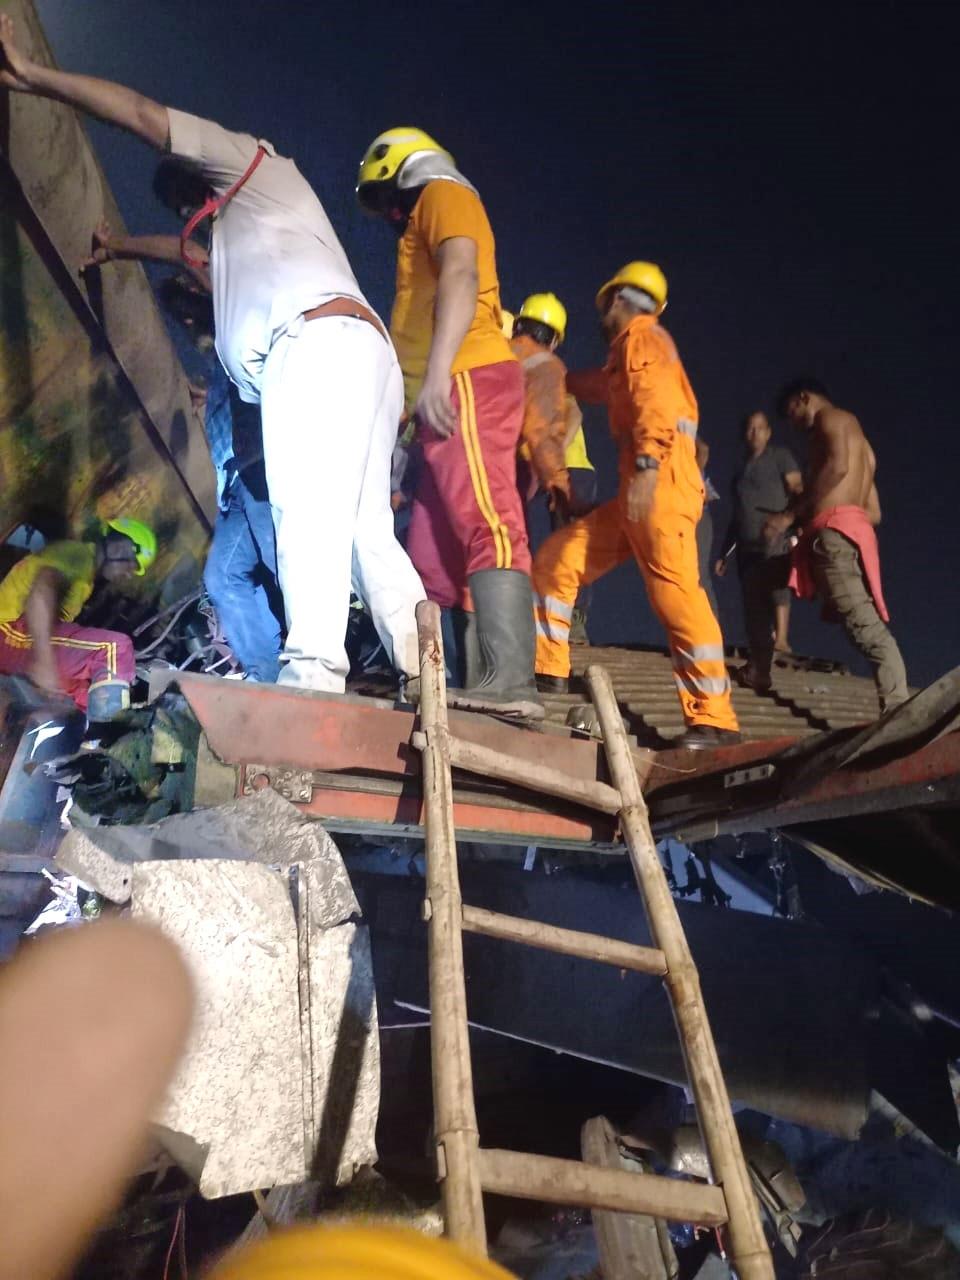  Major Train Accident In Odisha's Balasore As Express Trains Collide And Derails, 50 Fatalities Reported (Lead) 